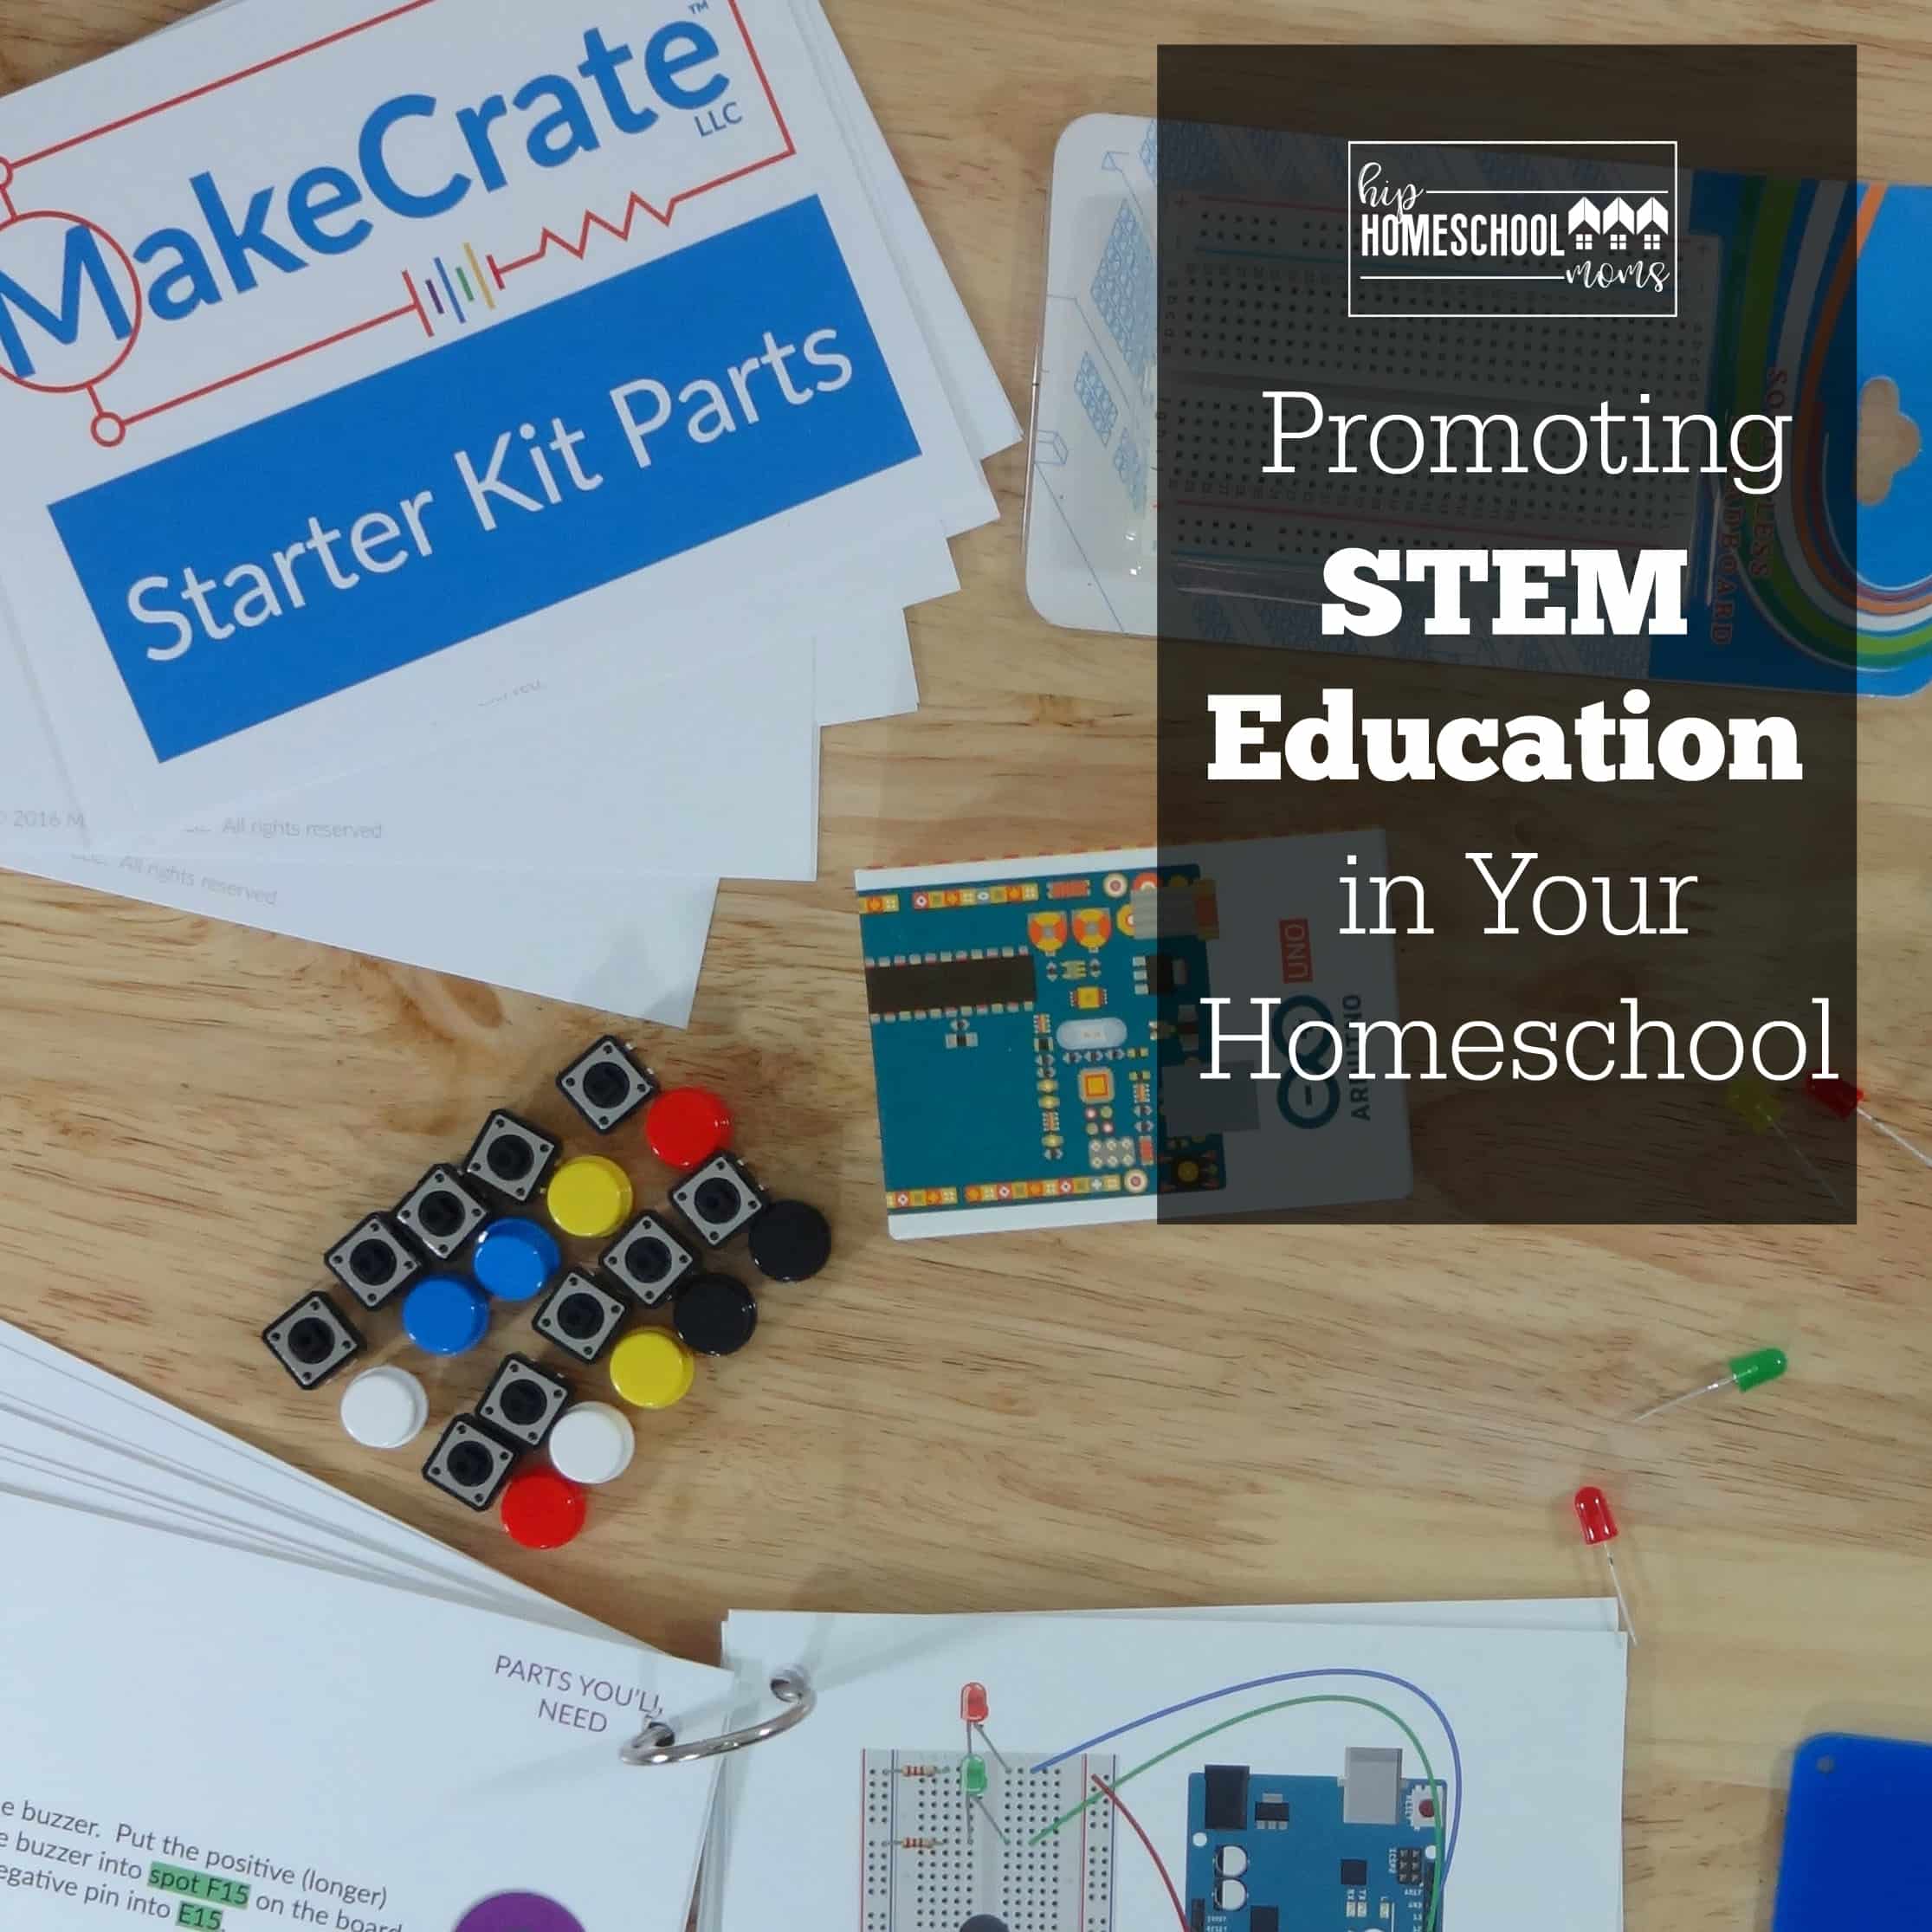 Promoting STEM Education in Your Homeschool